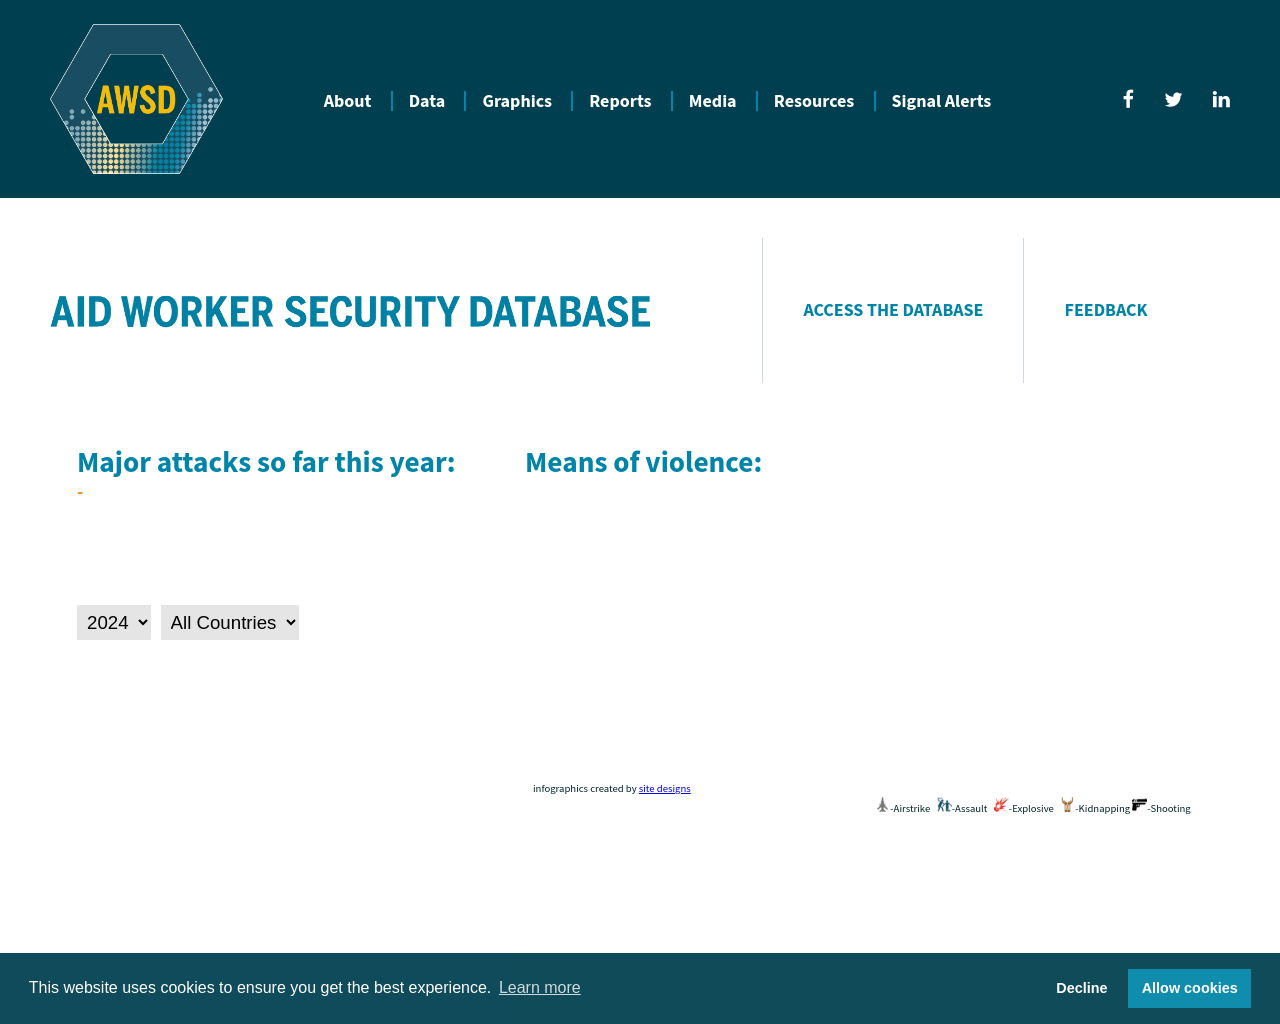 aidworkersecurity.org